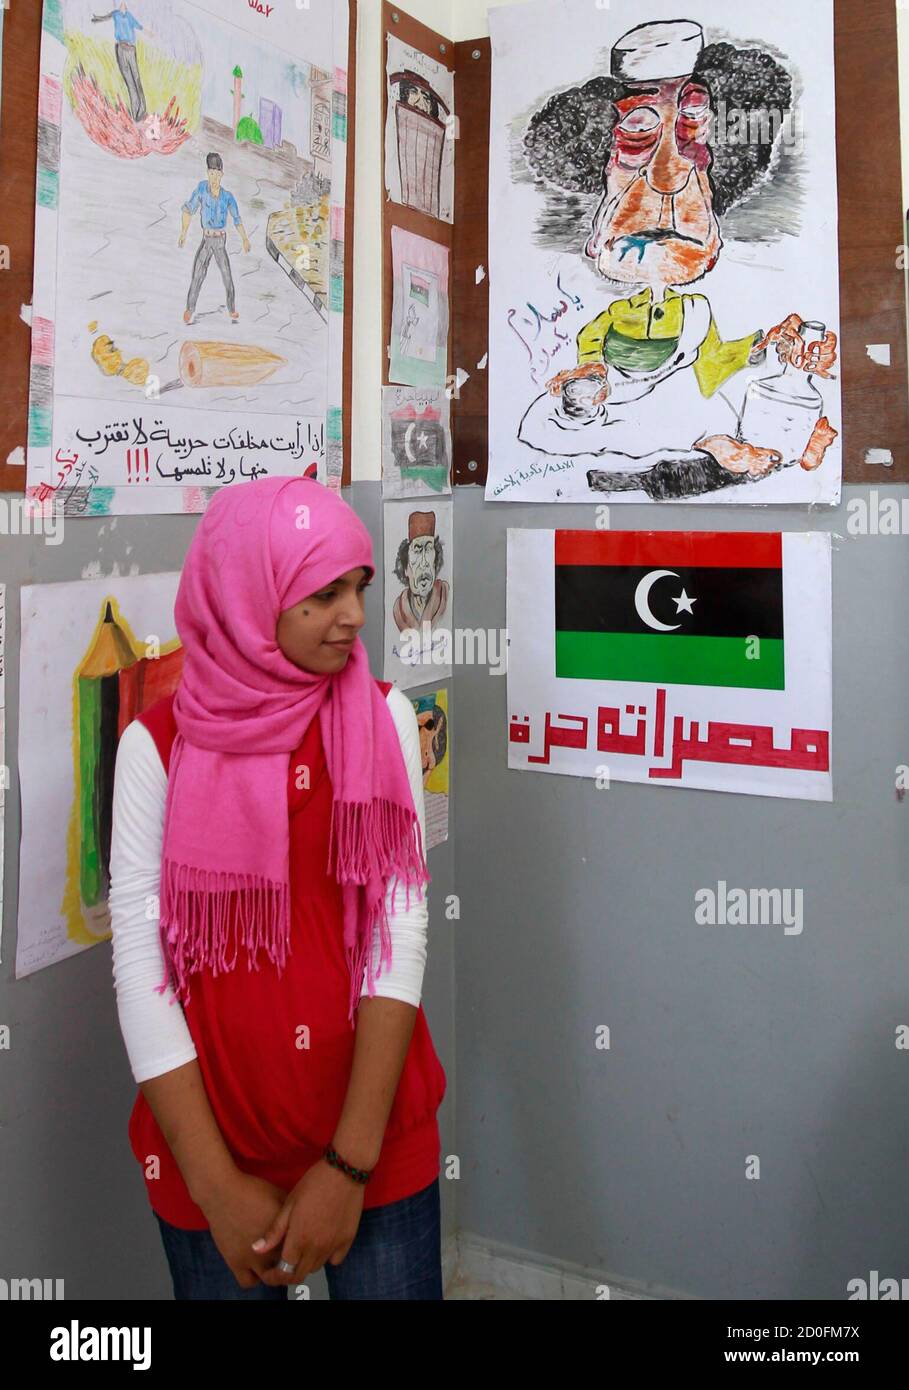 A Libyan girl stands in front a caricature of Libyan leader Muammar Gaddafi  in a school in the rebel-held city of Misrata, July 18, 2011.  REUTERS/Thaier al-Sudani (LIBYA - Tags: POLITICS CONFLICT